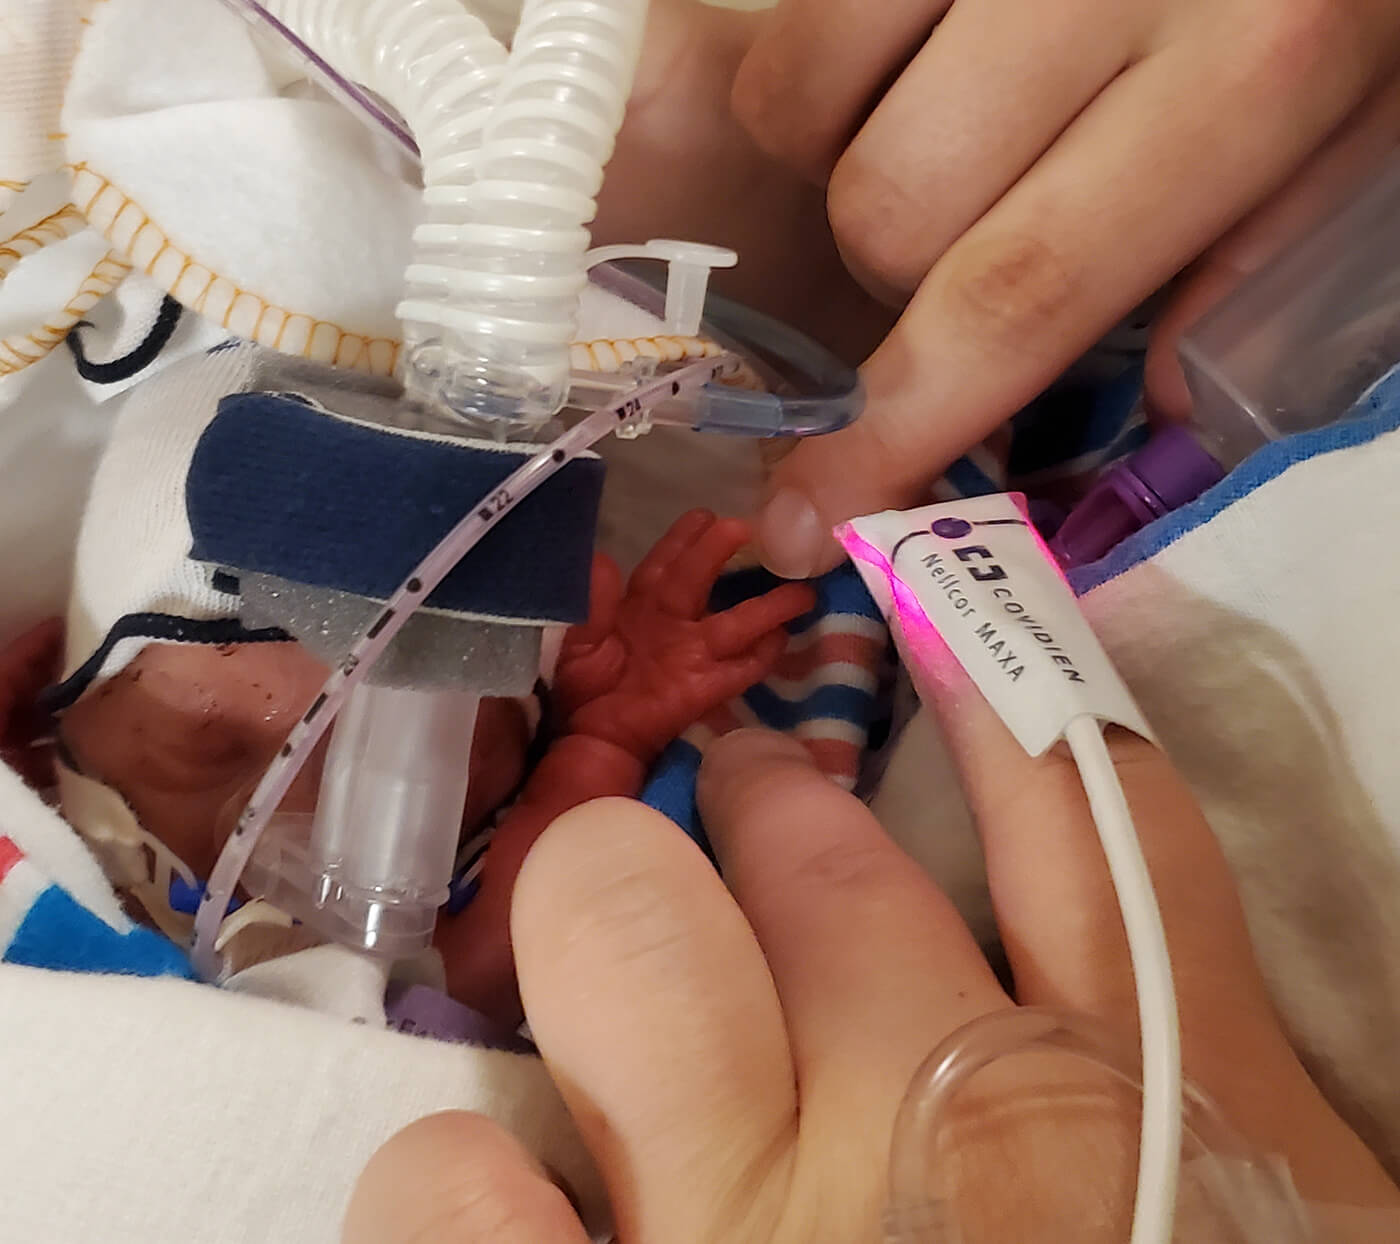 “Otteroo Gave Her Control Over Her Own Little Body,” Says Mom of Preemie